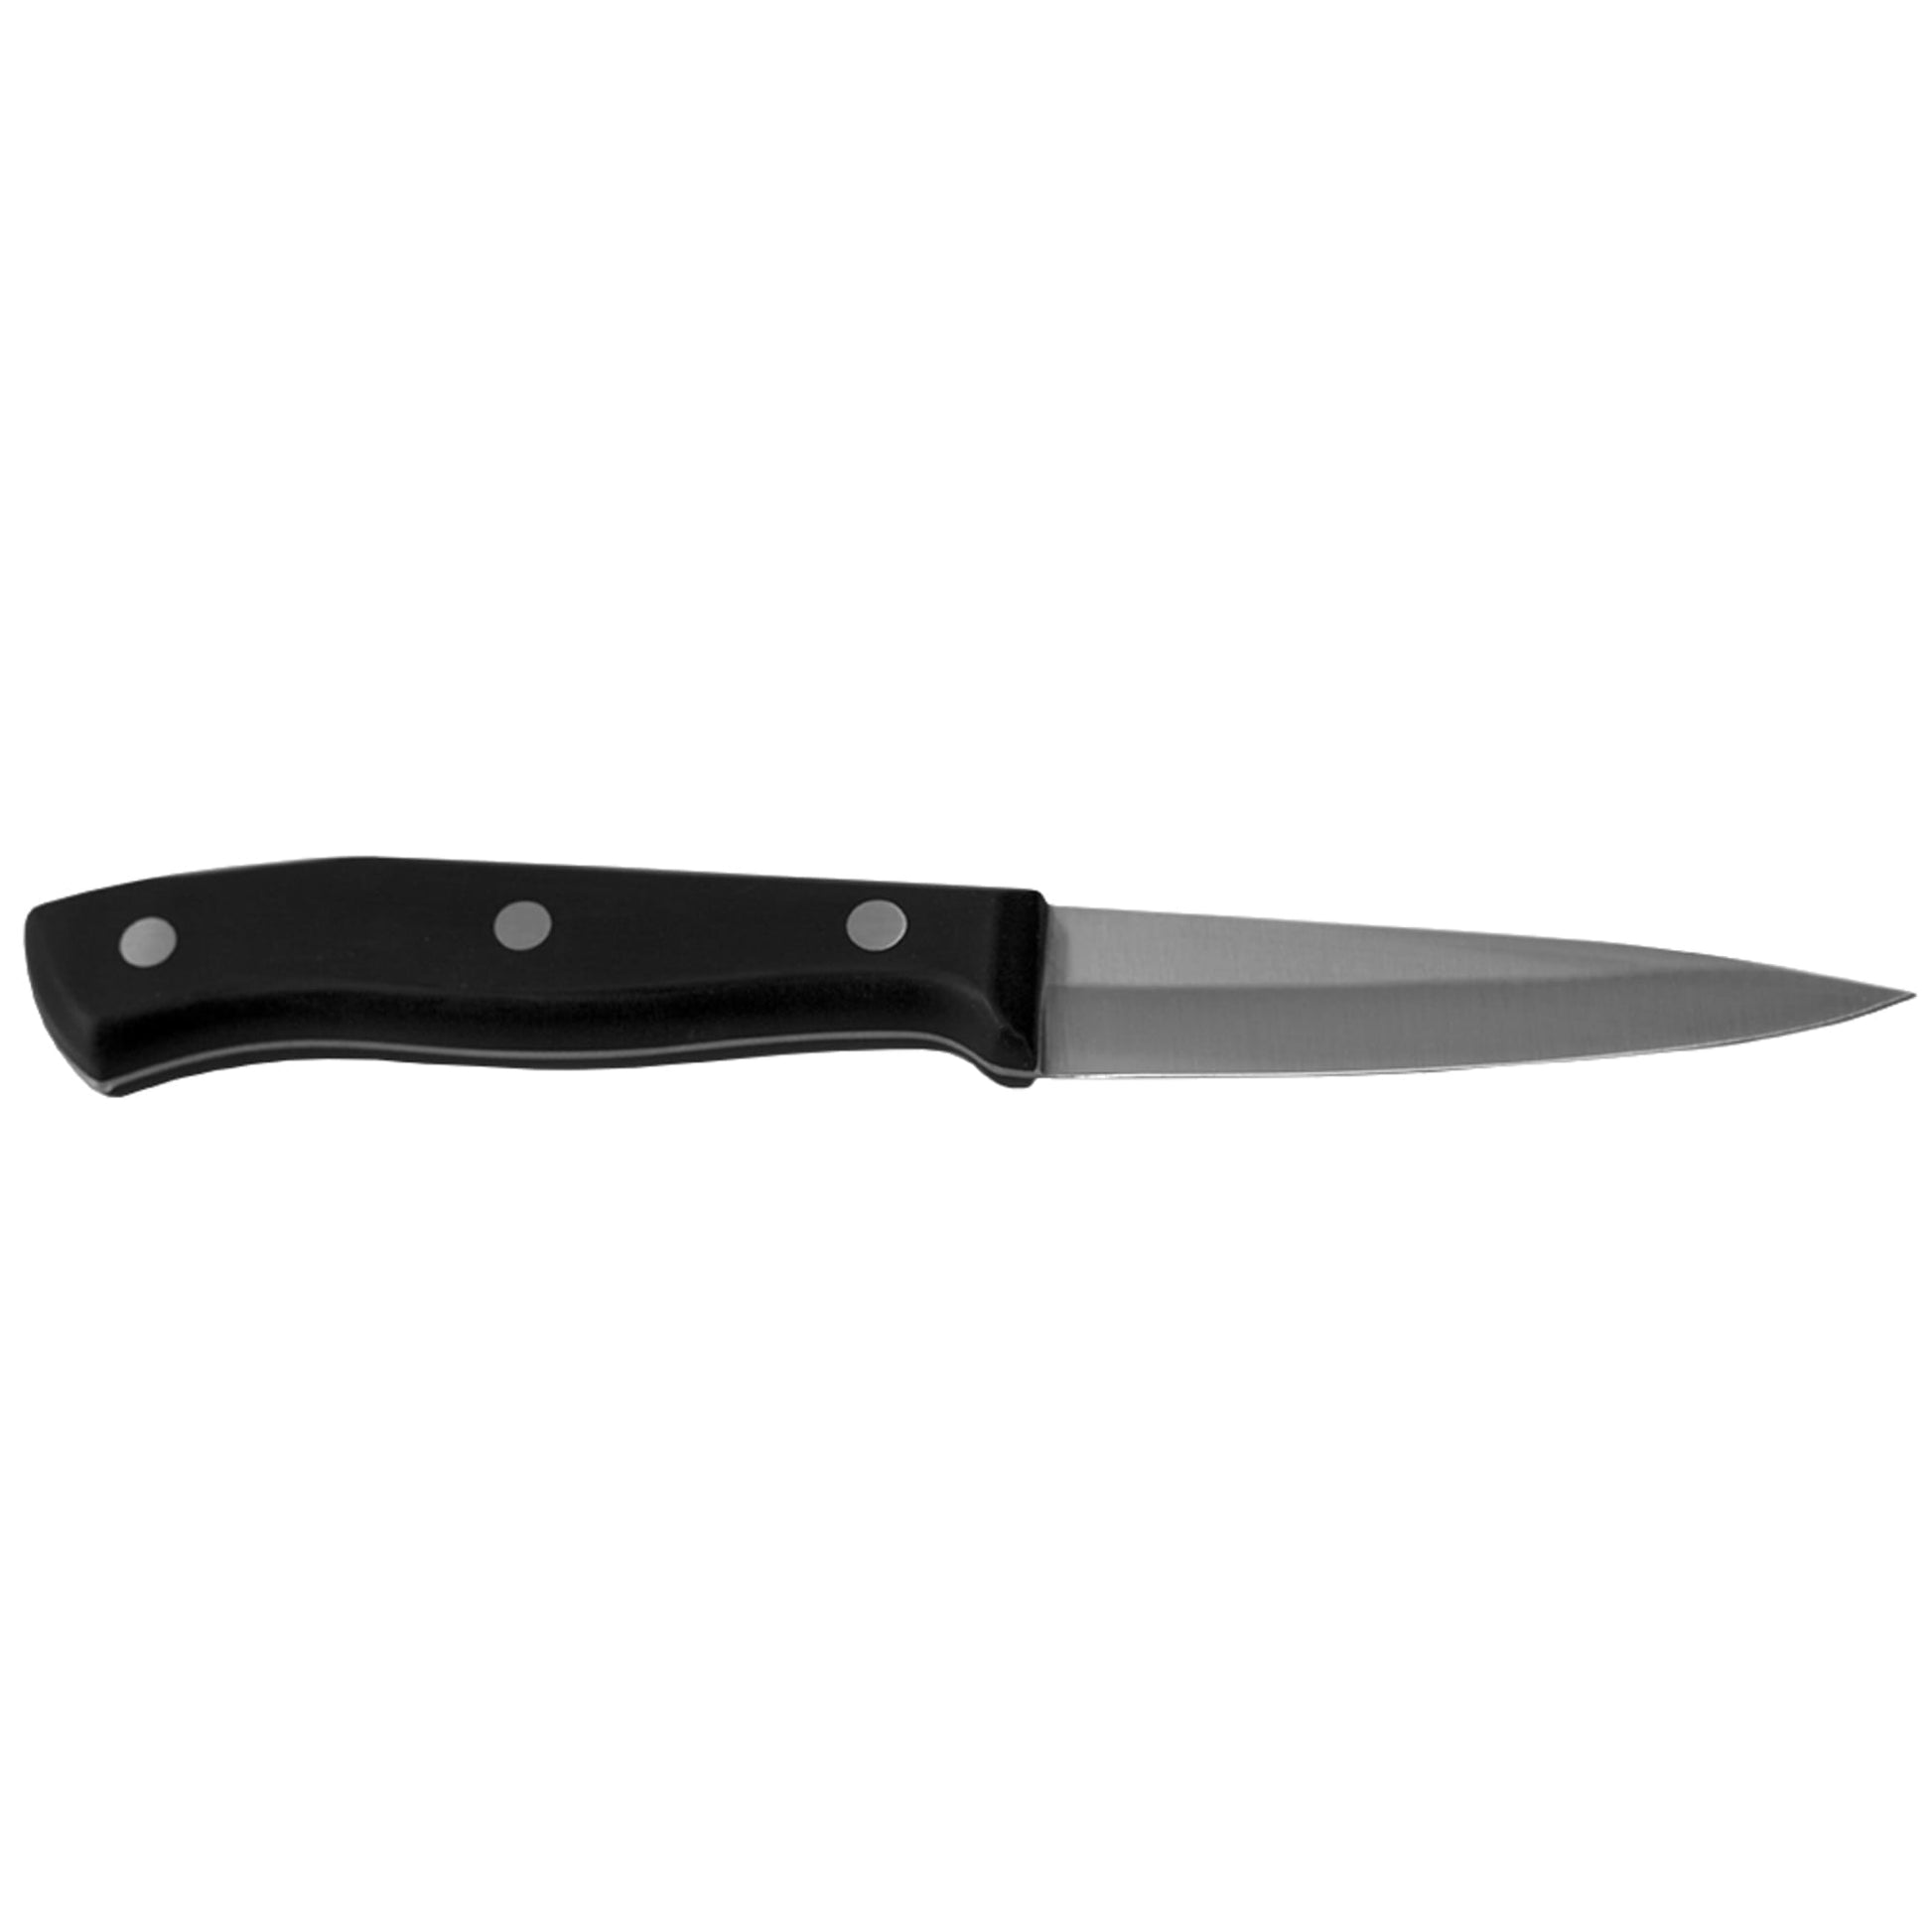  OXO Good Grips 3.5 Inch Pairing Knife,Black/Silver,3-1